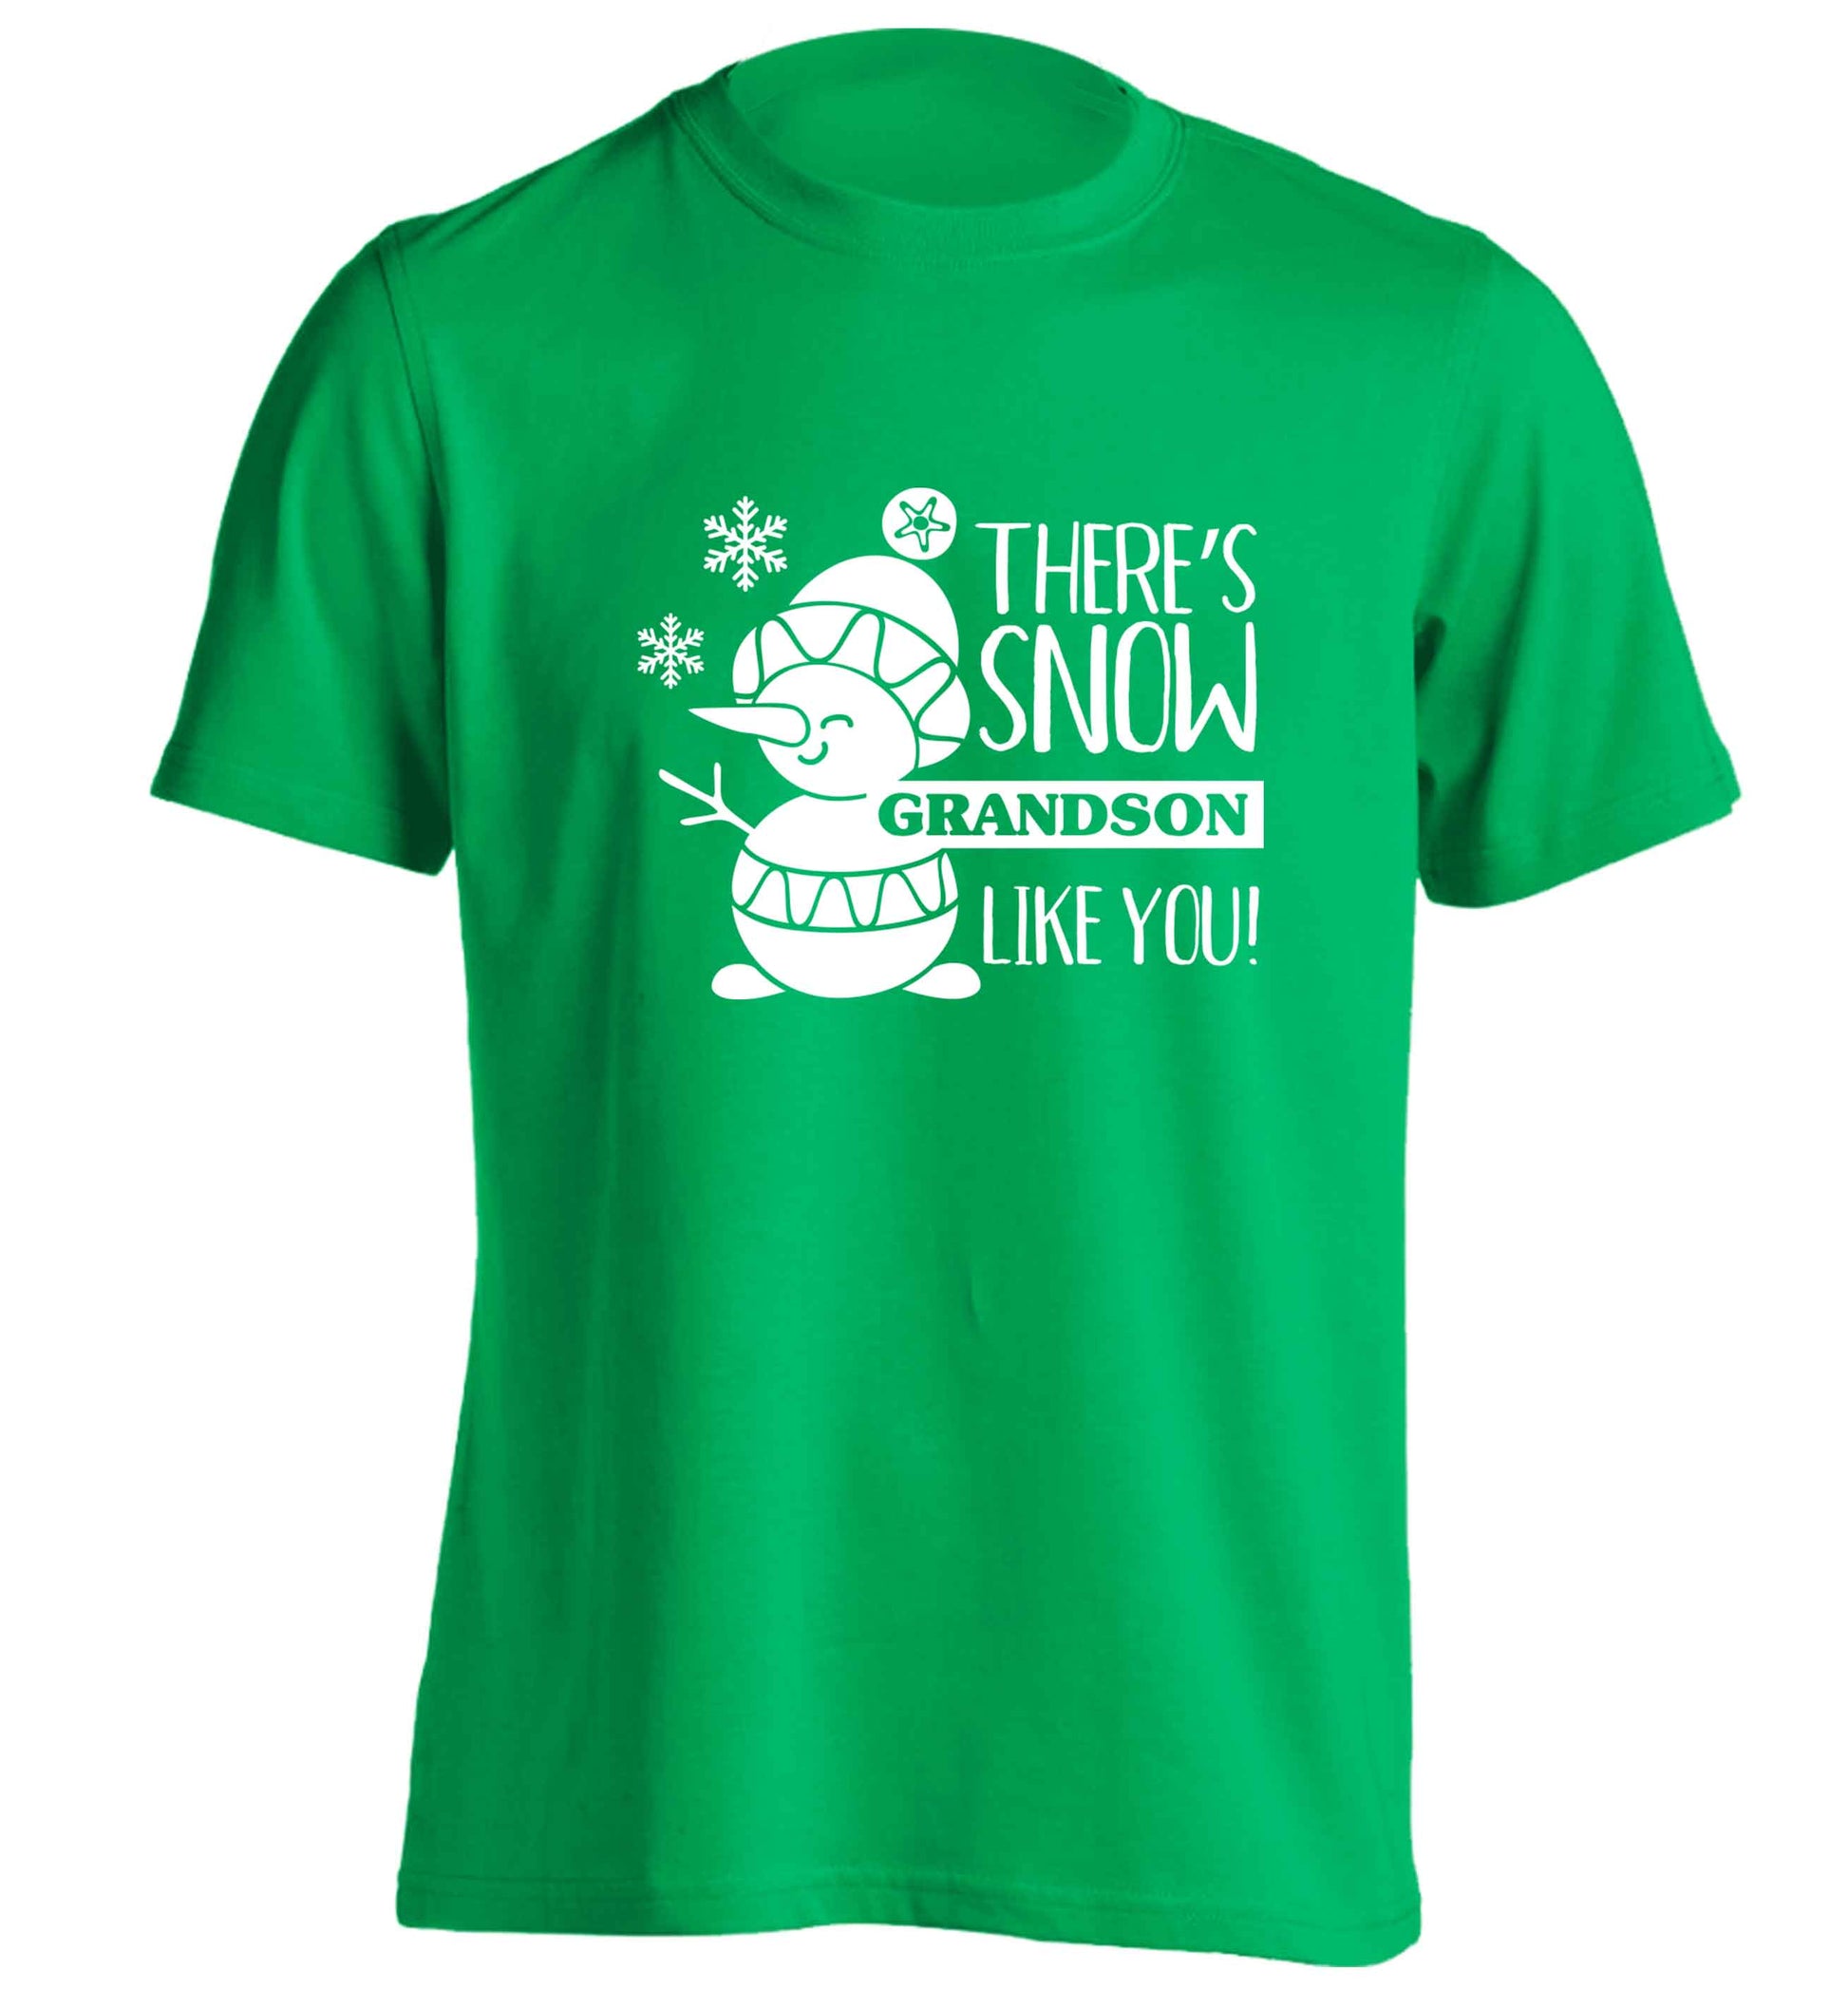 There's snow grandson like you adults unisex green Tshirt 2XL